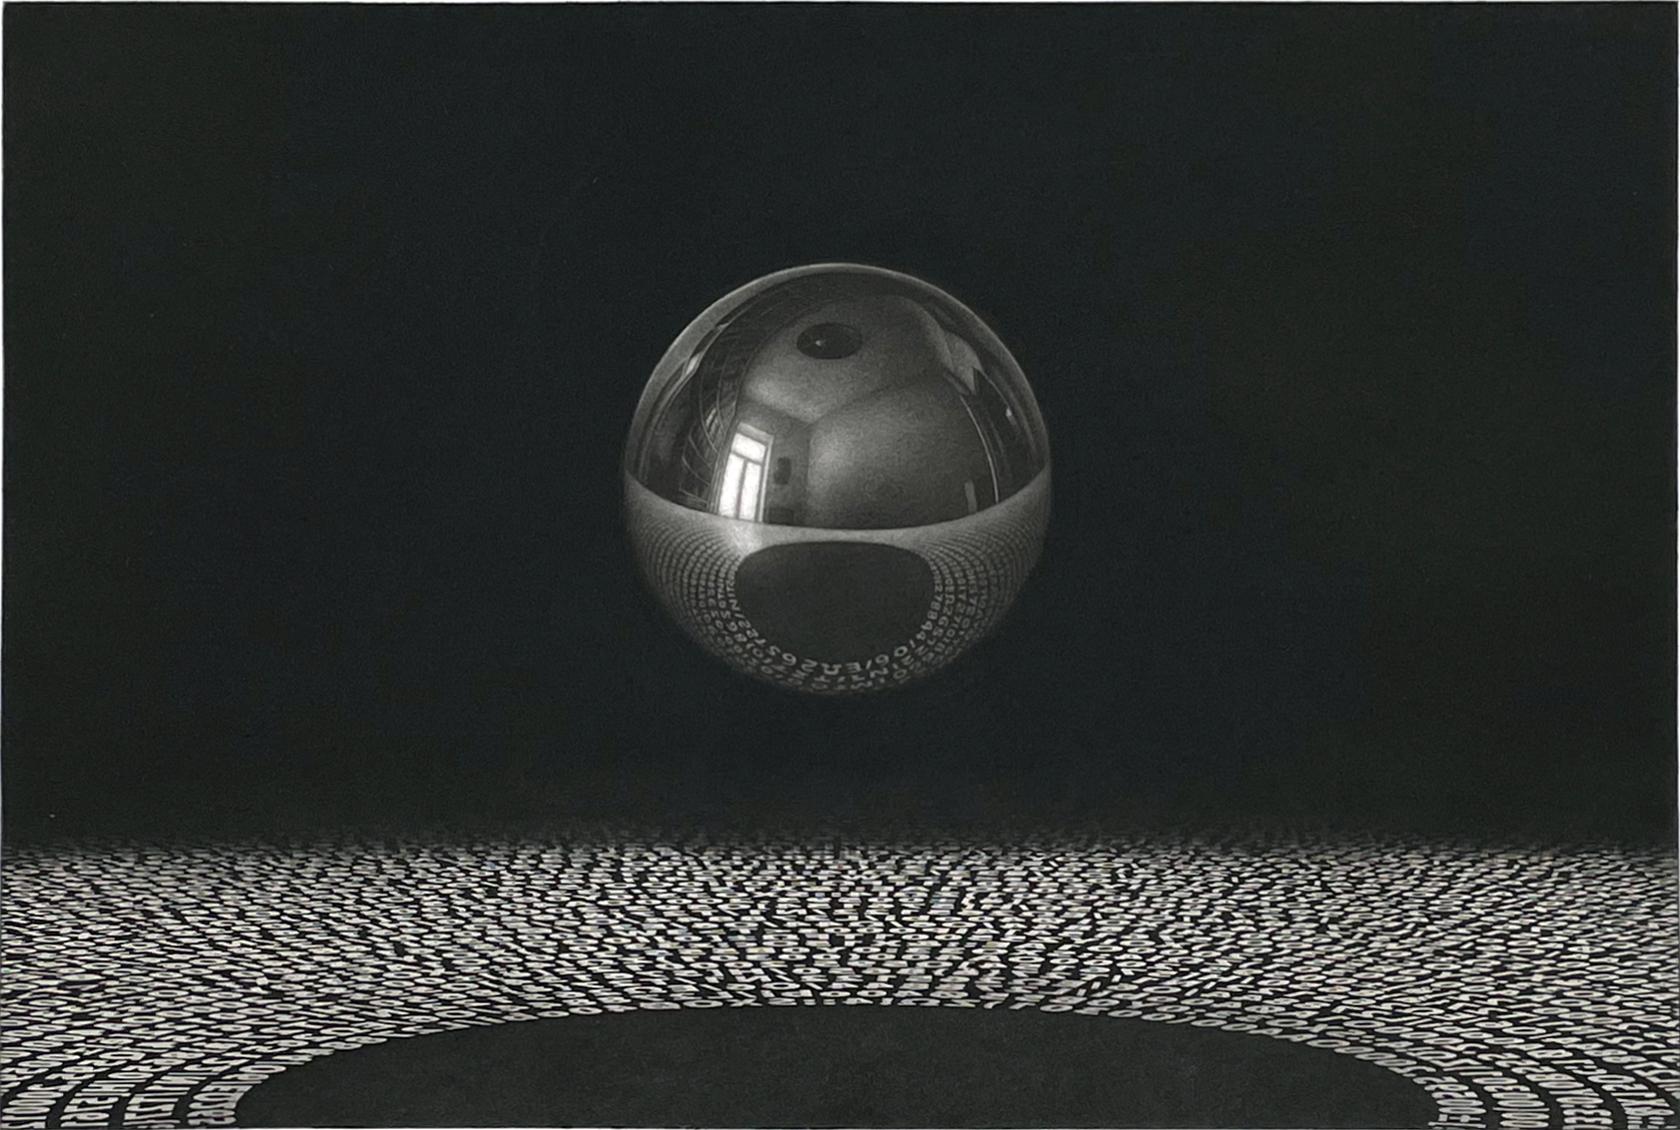 Medium: mezzotint and aquatint
Year: 2014
Edition: 30, signed in pencil.
Image Size: 12 x 15.75 inches
Signed, titled and numbered by the artist.

The illusions and reflections in Sietins prints often bring M.C. Escher to mind, but his prints have a